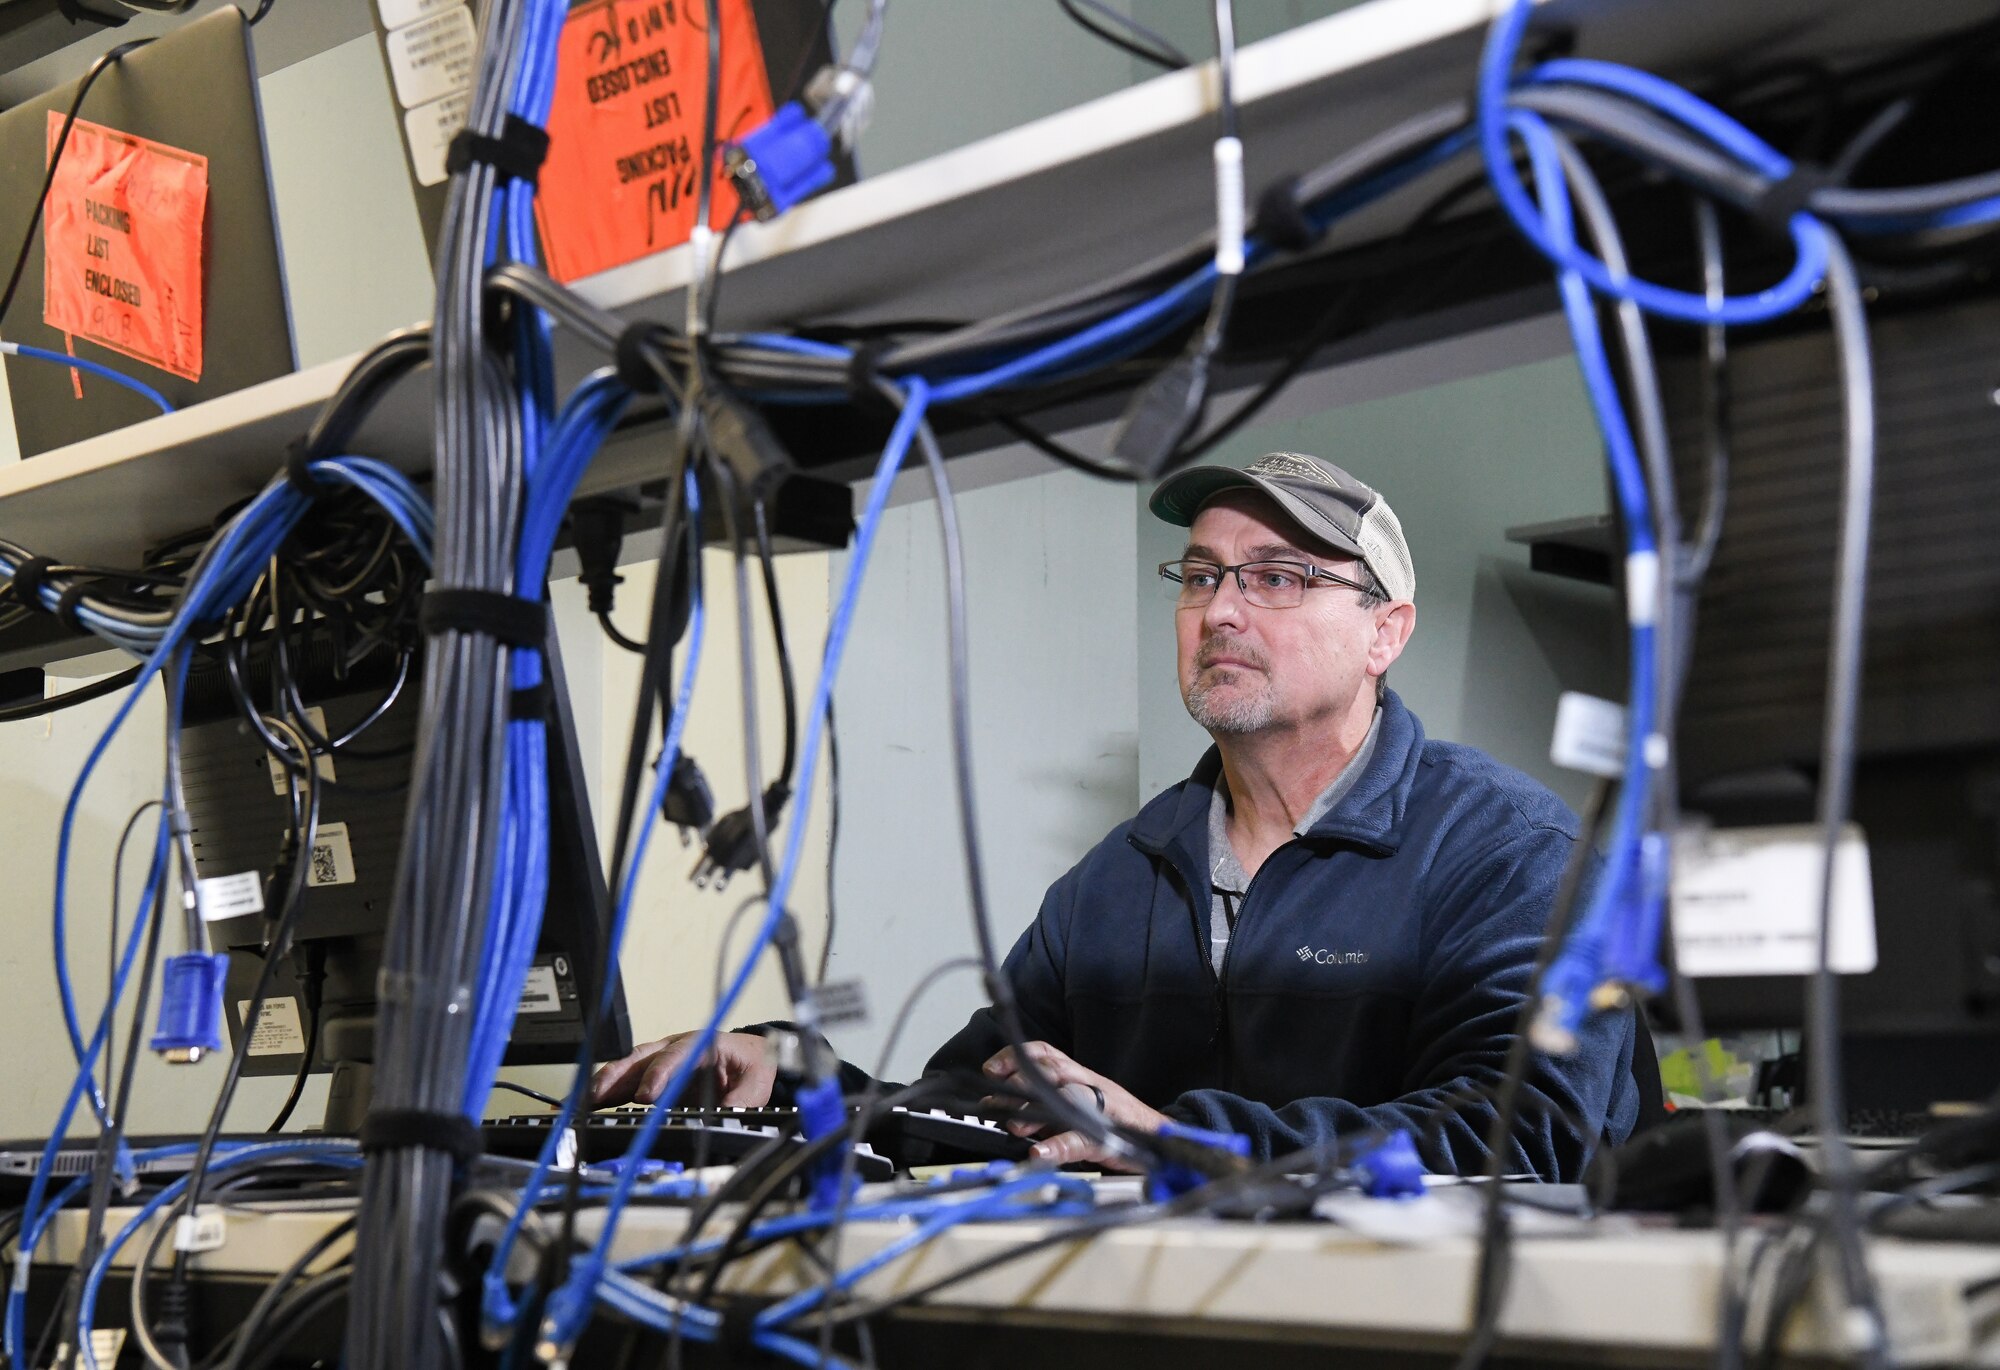 Troy Haywood, lead computer network technician, restages a computer for Non-Classified Internet Protocol Router Network, Dec. 12, 2019, in the PC Staging Area at Arnold Air Force Base, Tenn. Computers must be loaded with required software and necessary security protocols prior to being deployed for use by AEDC team members. (U.S. Air Force photo by Jill Pickett)